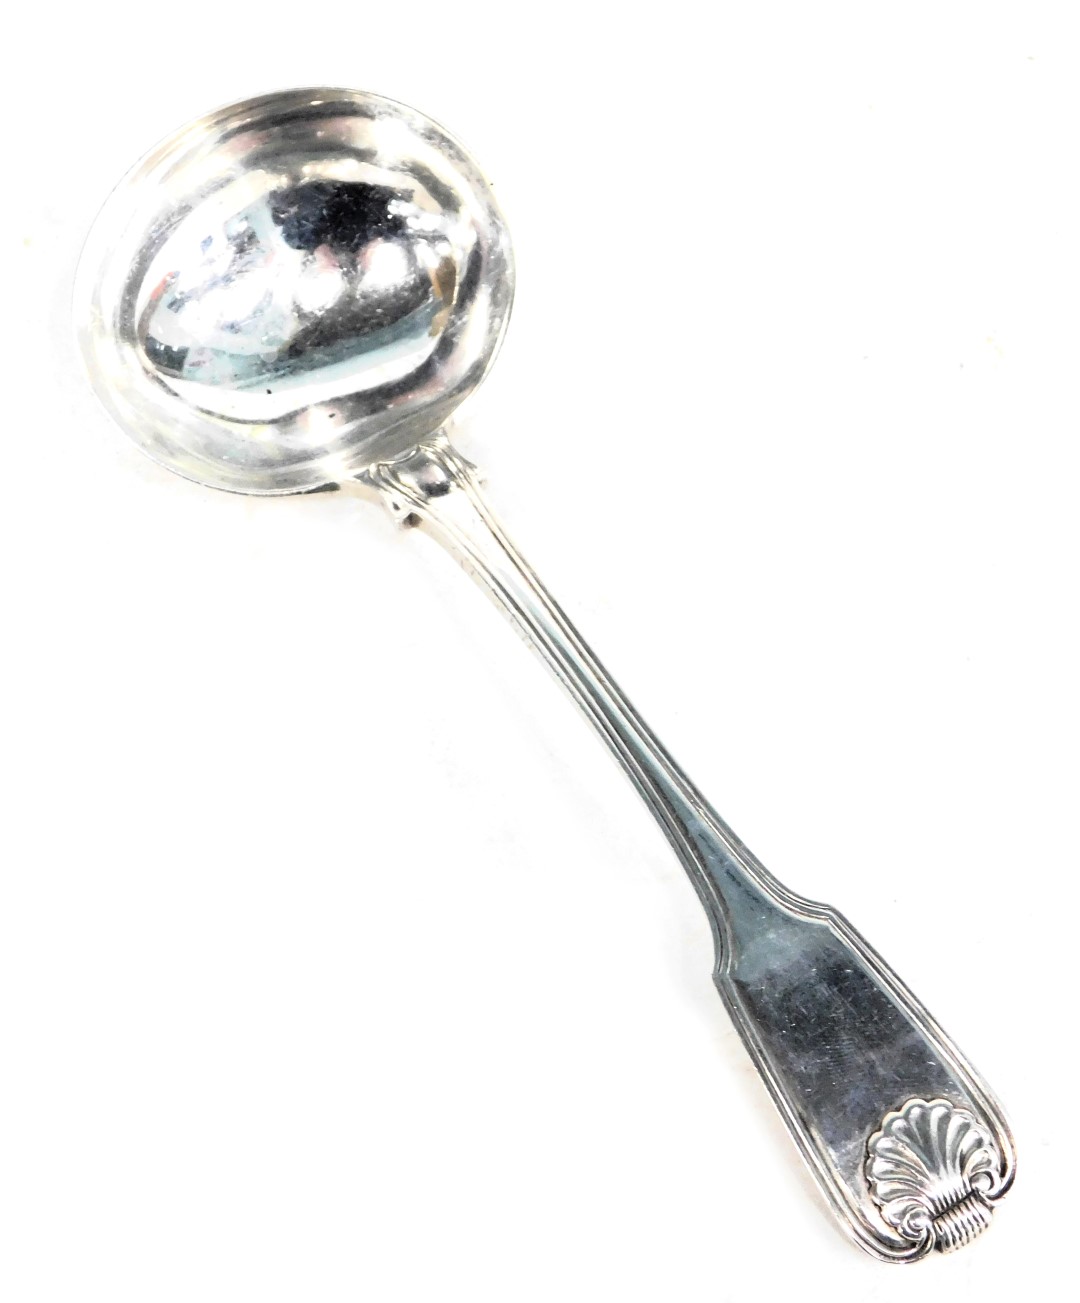 A white metal toddy ladle, shell patterned and reeded top, maker T&Co bearing lion crest, hallmarks